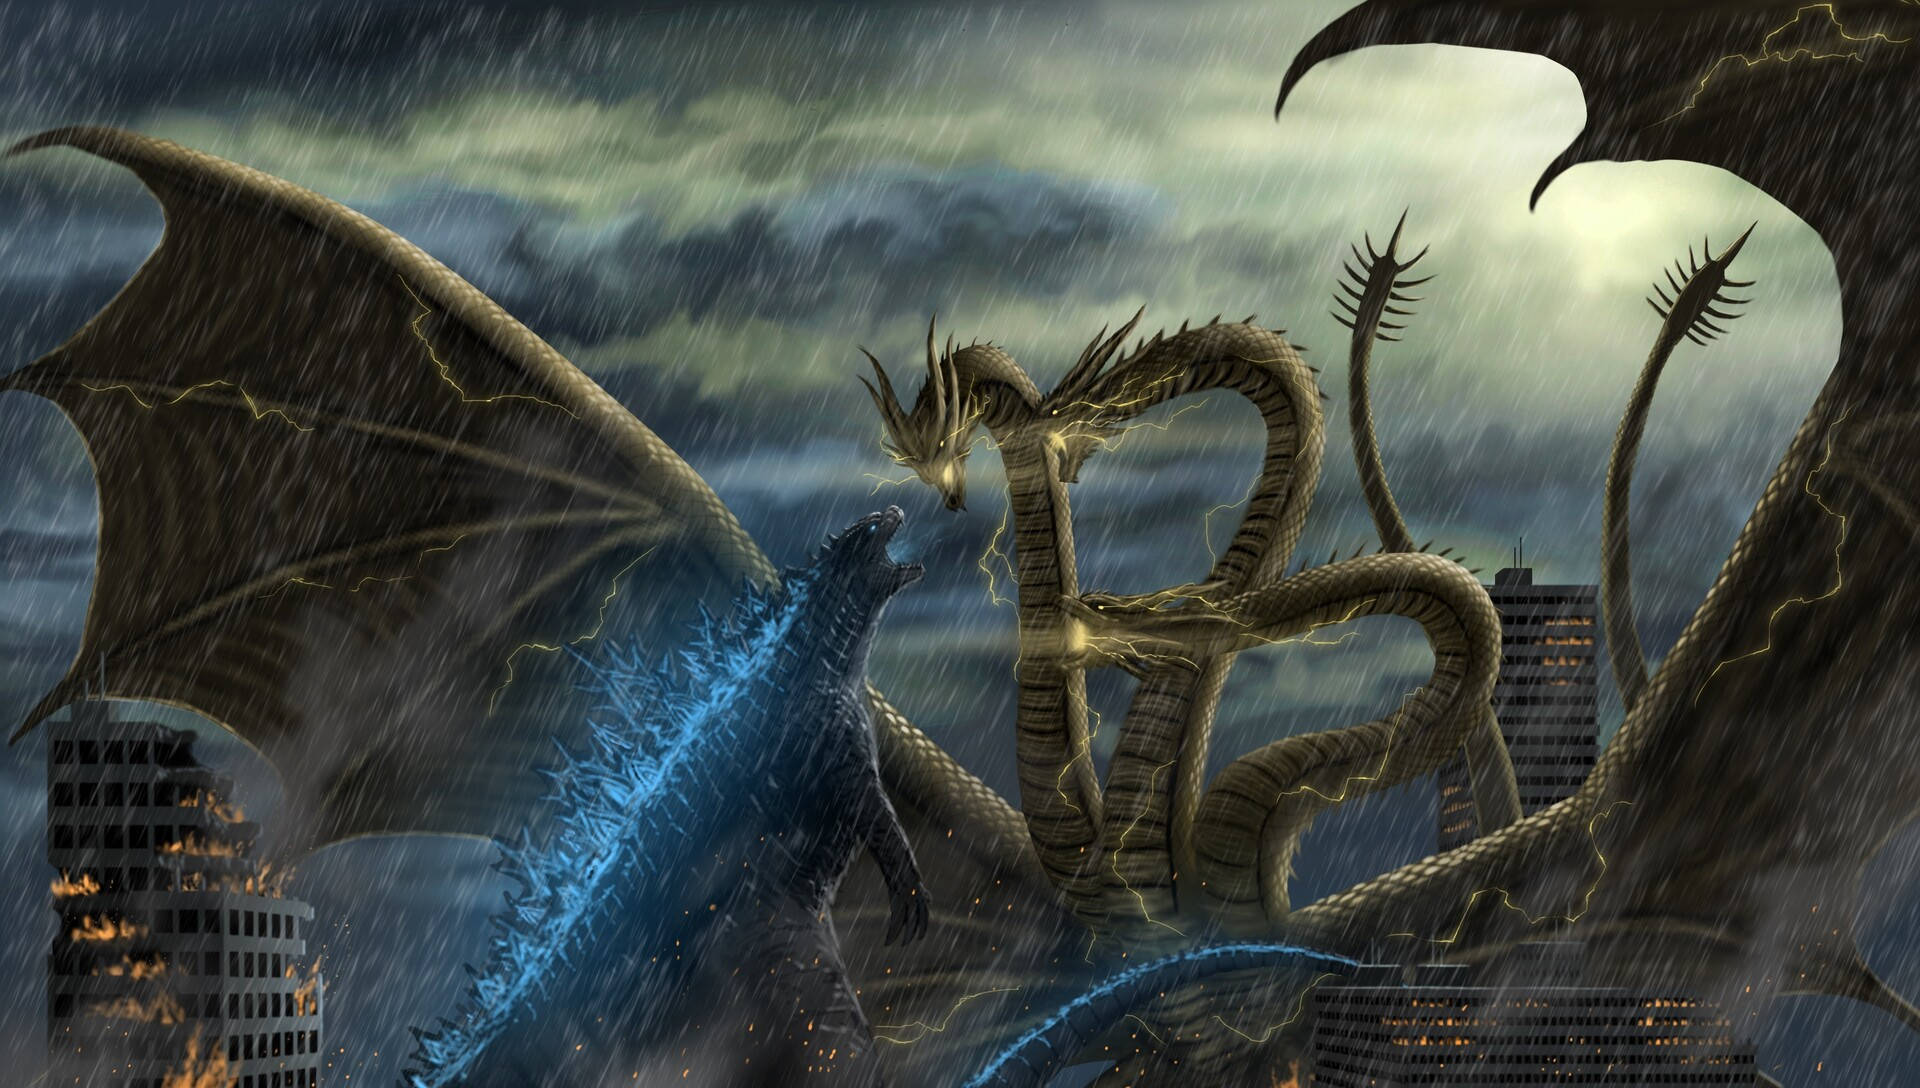 Brace yourselves for an epic battle as Godzilla, King of the Monsters, unleashes a devastating assault Wallpaper